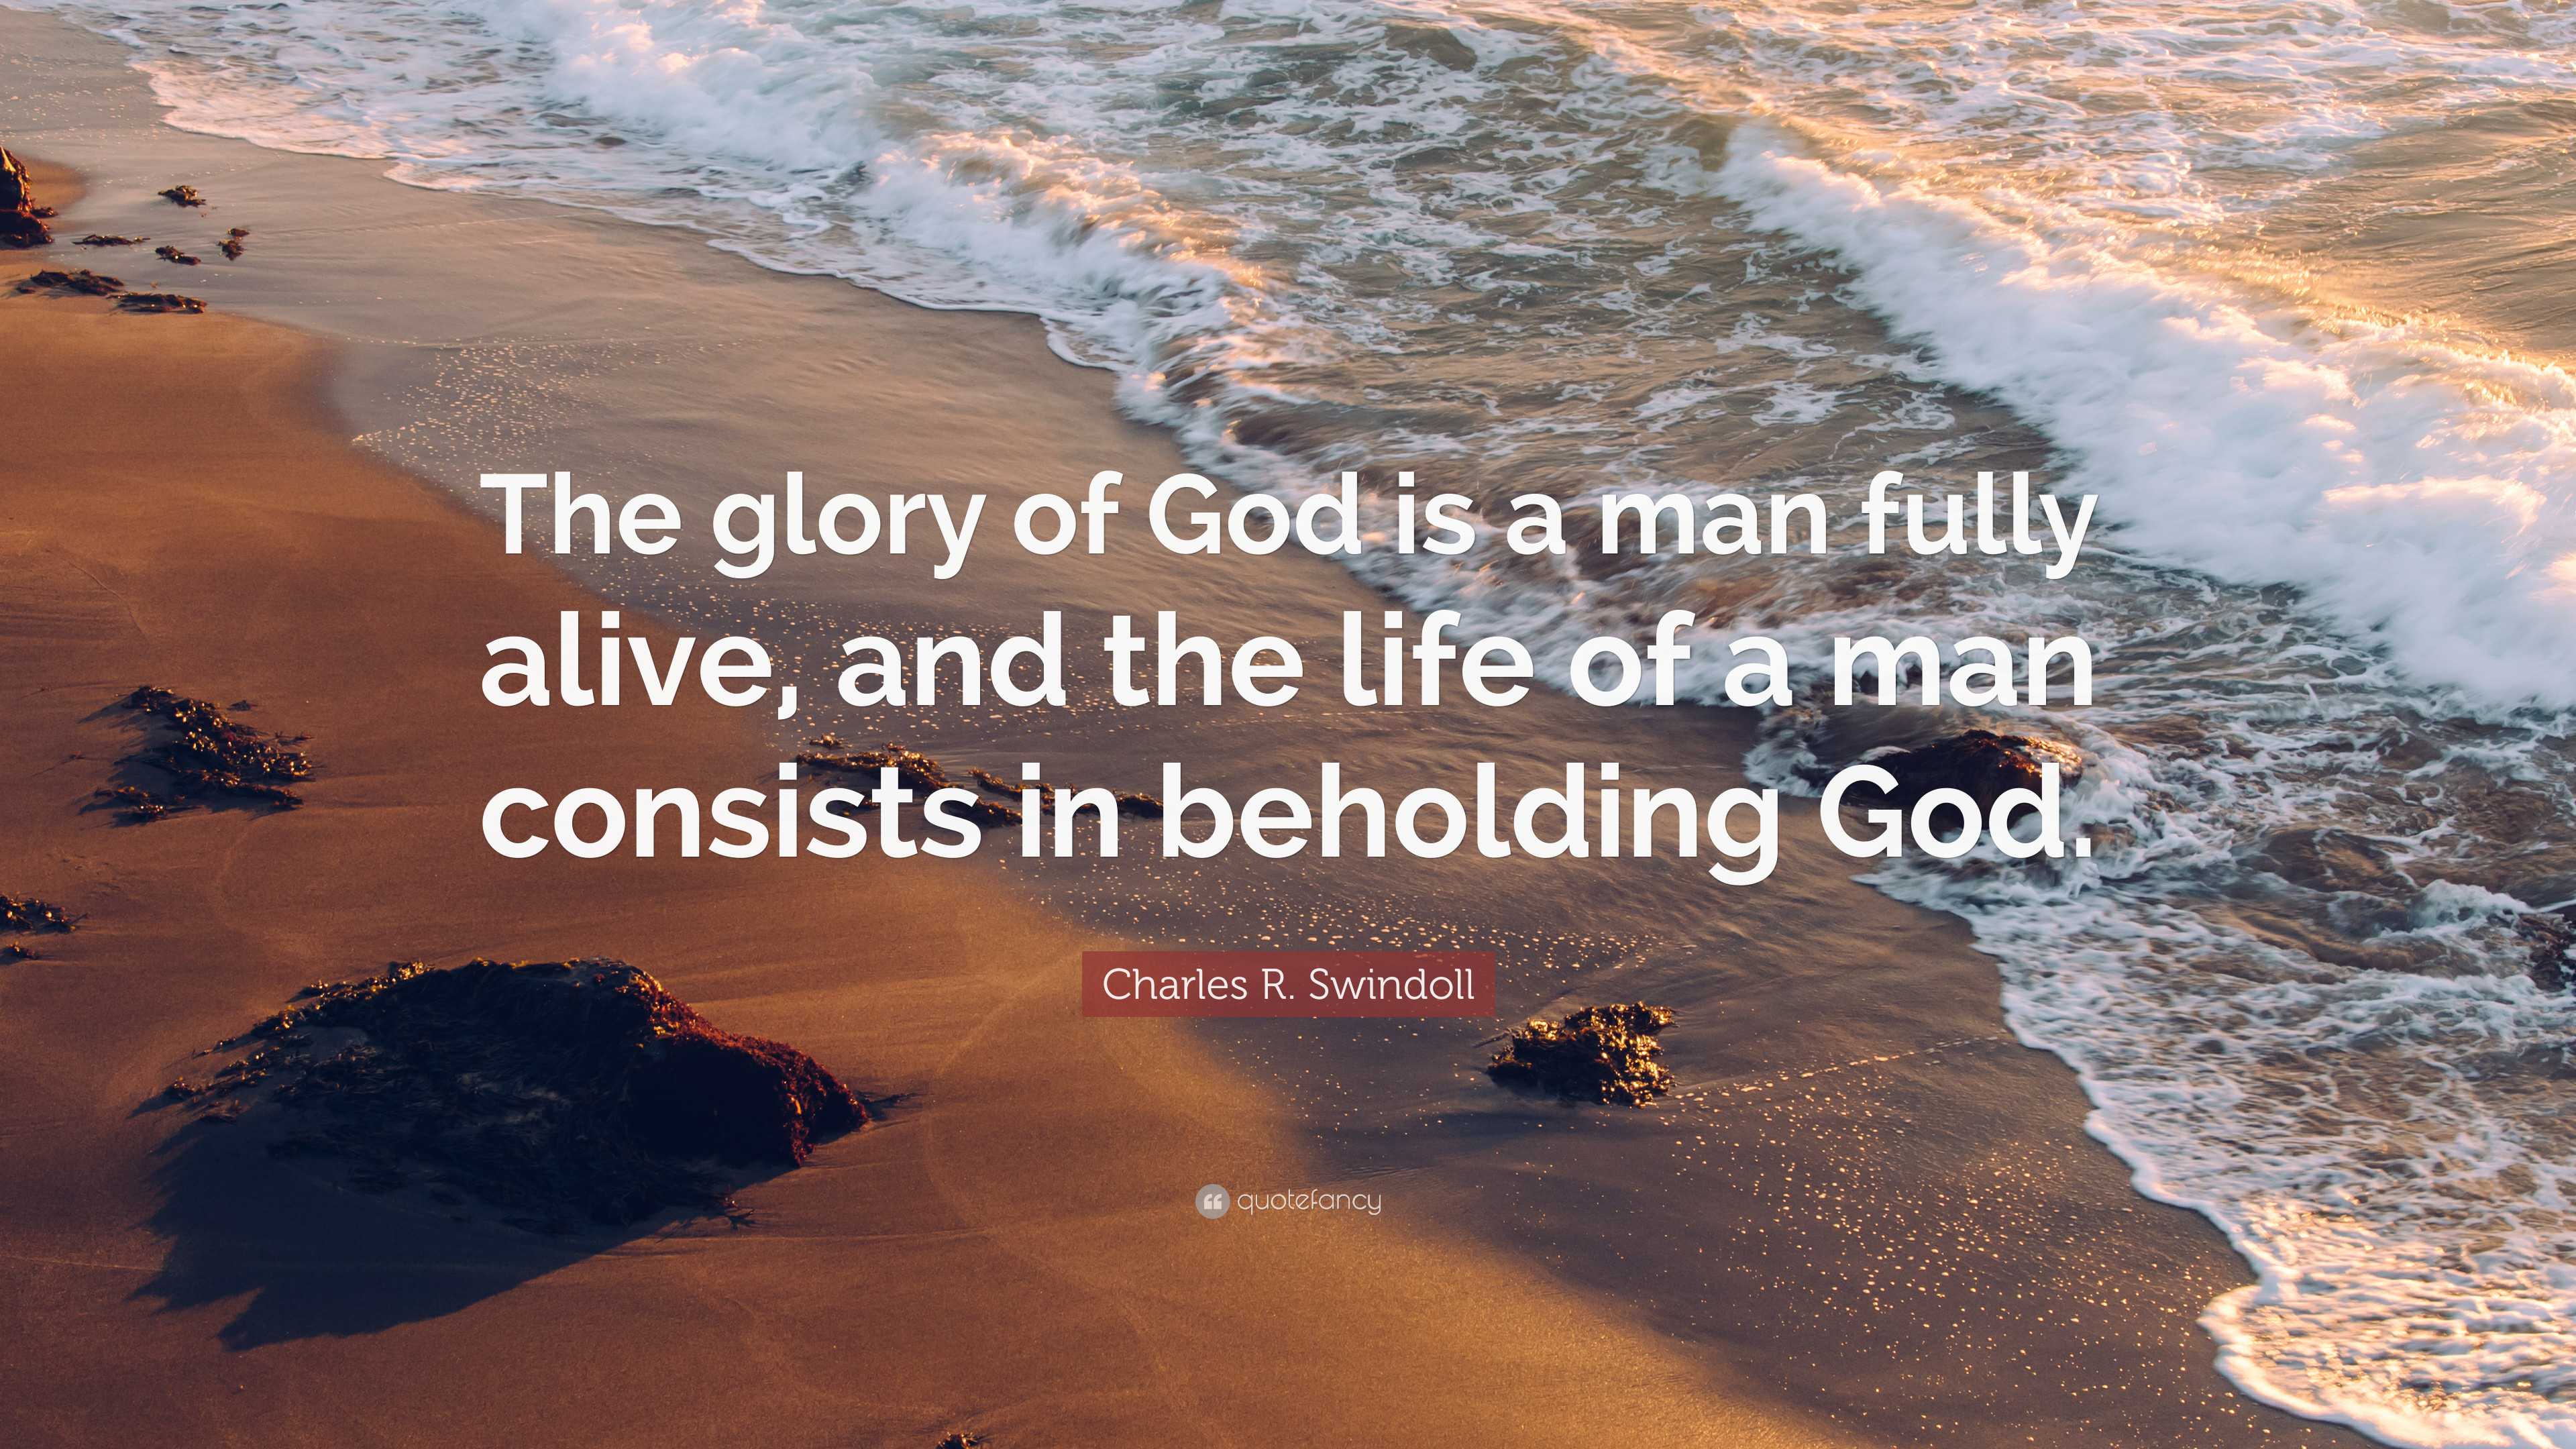 Charles R. Swindoll Quote: “The glory of God is a man fully alive, and ...